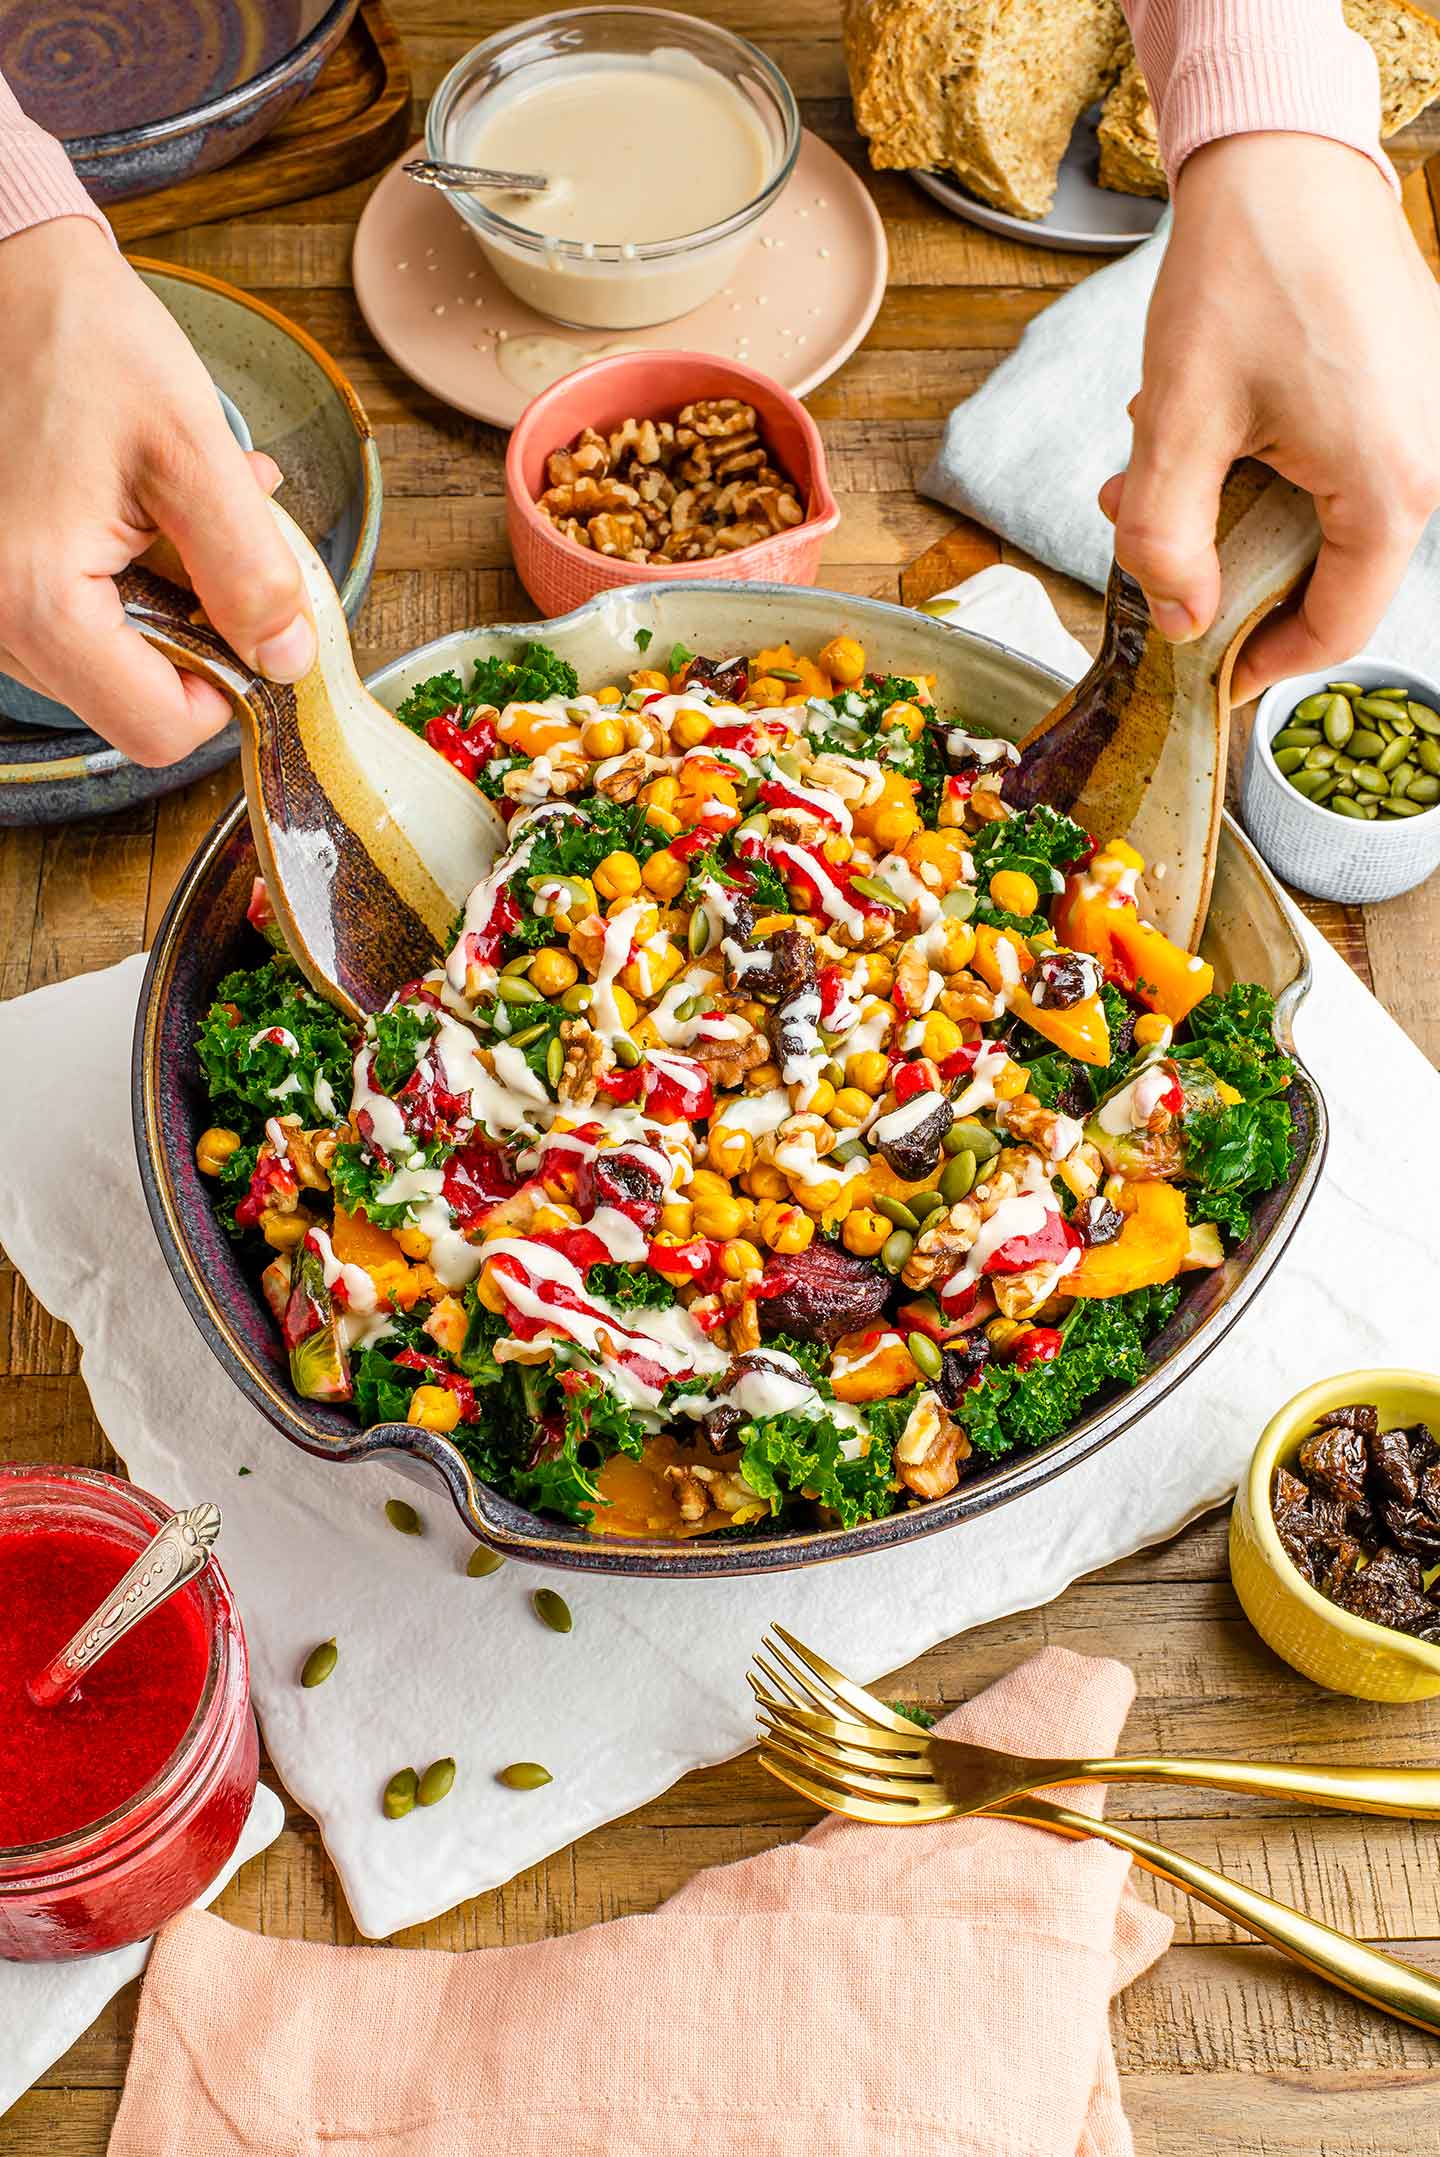 Top down view of a large colourful salad in a ceramic bowl with two hands tossing the salad with ceramic tongs. A creamy dressing and cranberry sauce are drizzled overtop kale, roasted vegetables, chickpeas, pumpkin seeds, and walnuts.